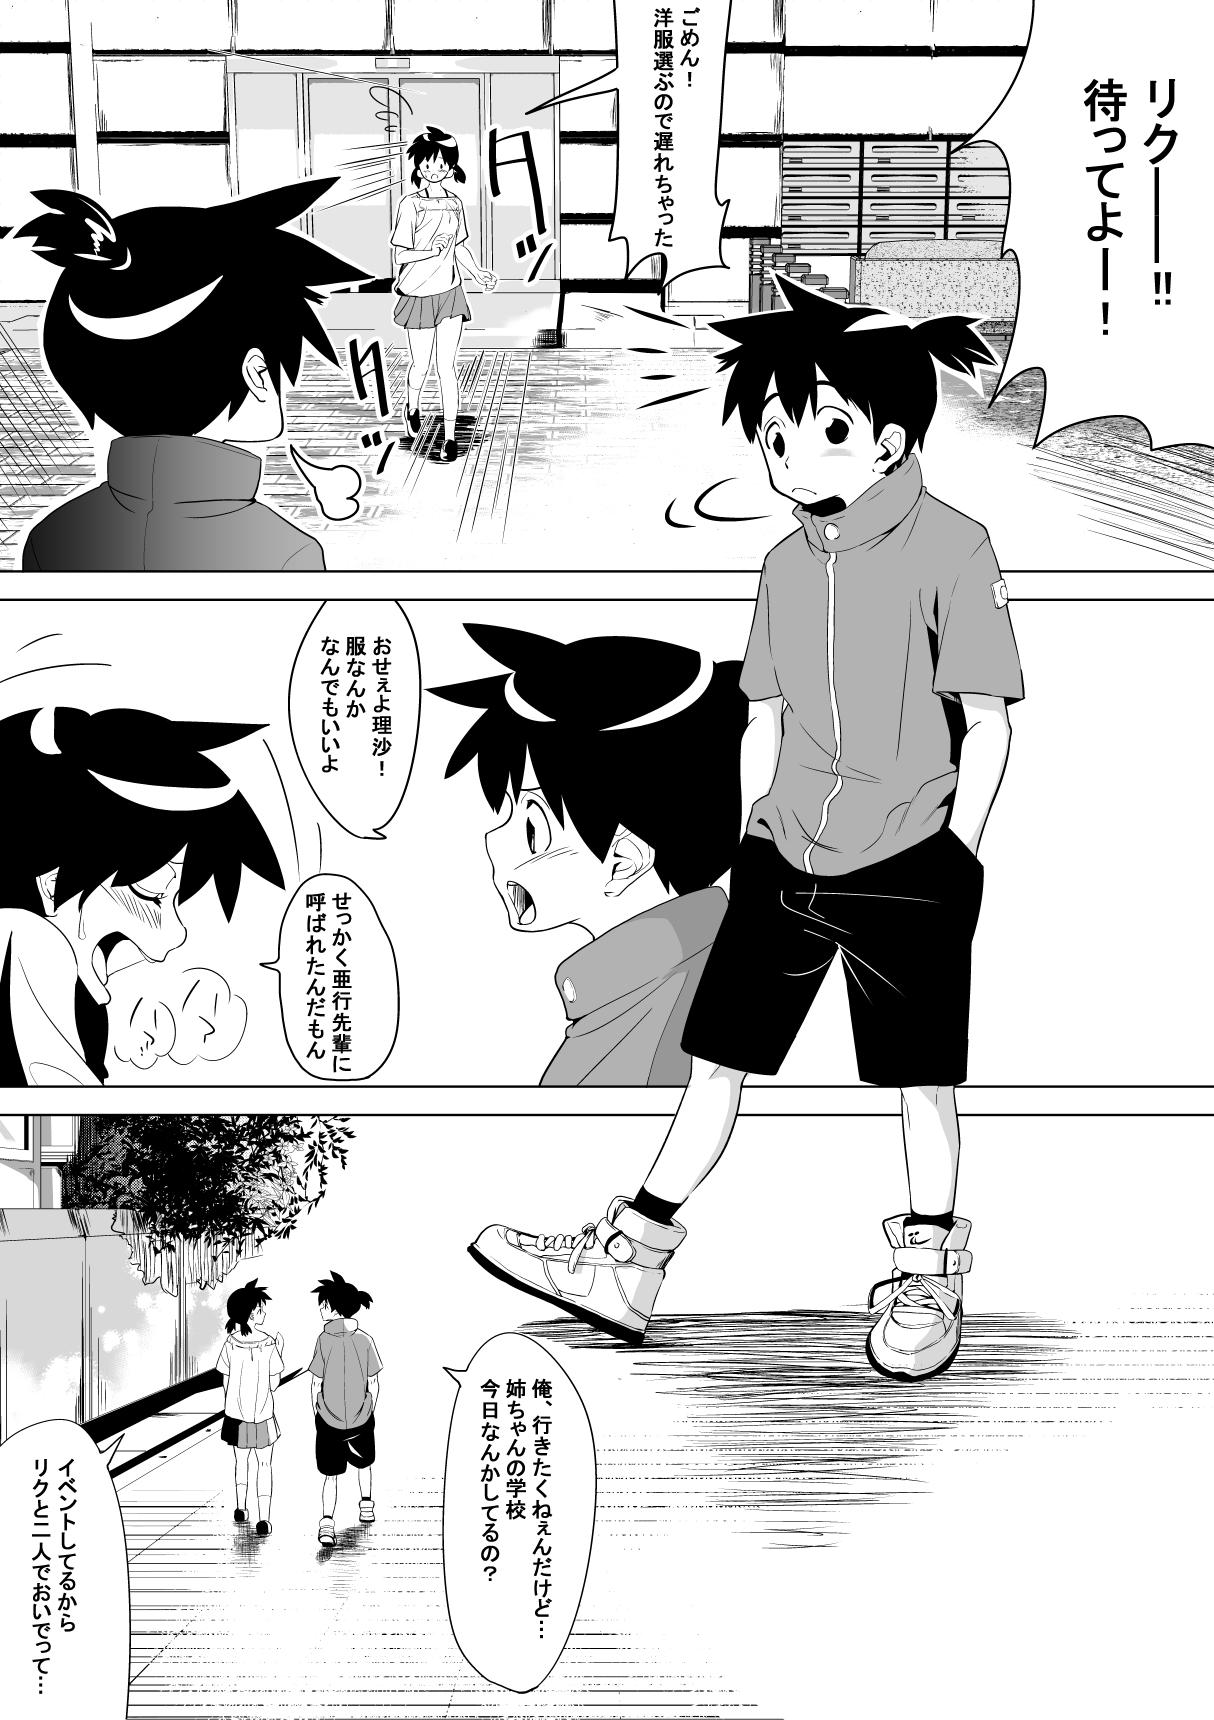 Spycam こんな国は嫌だ Peluda - Page 6